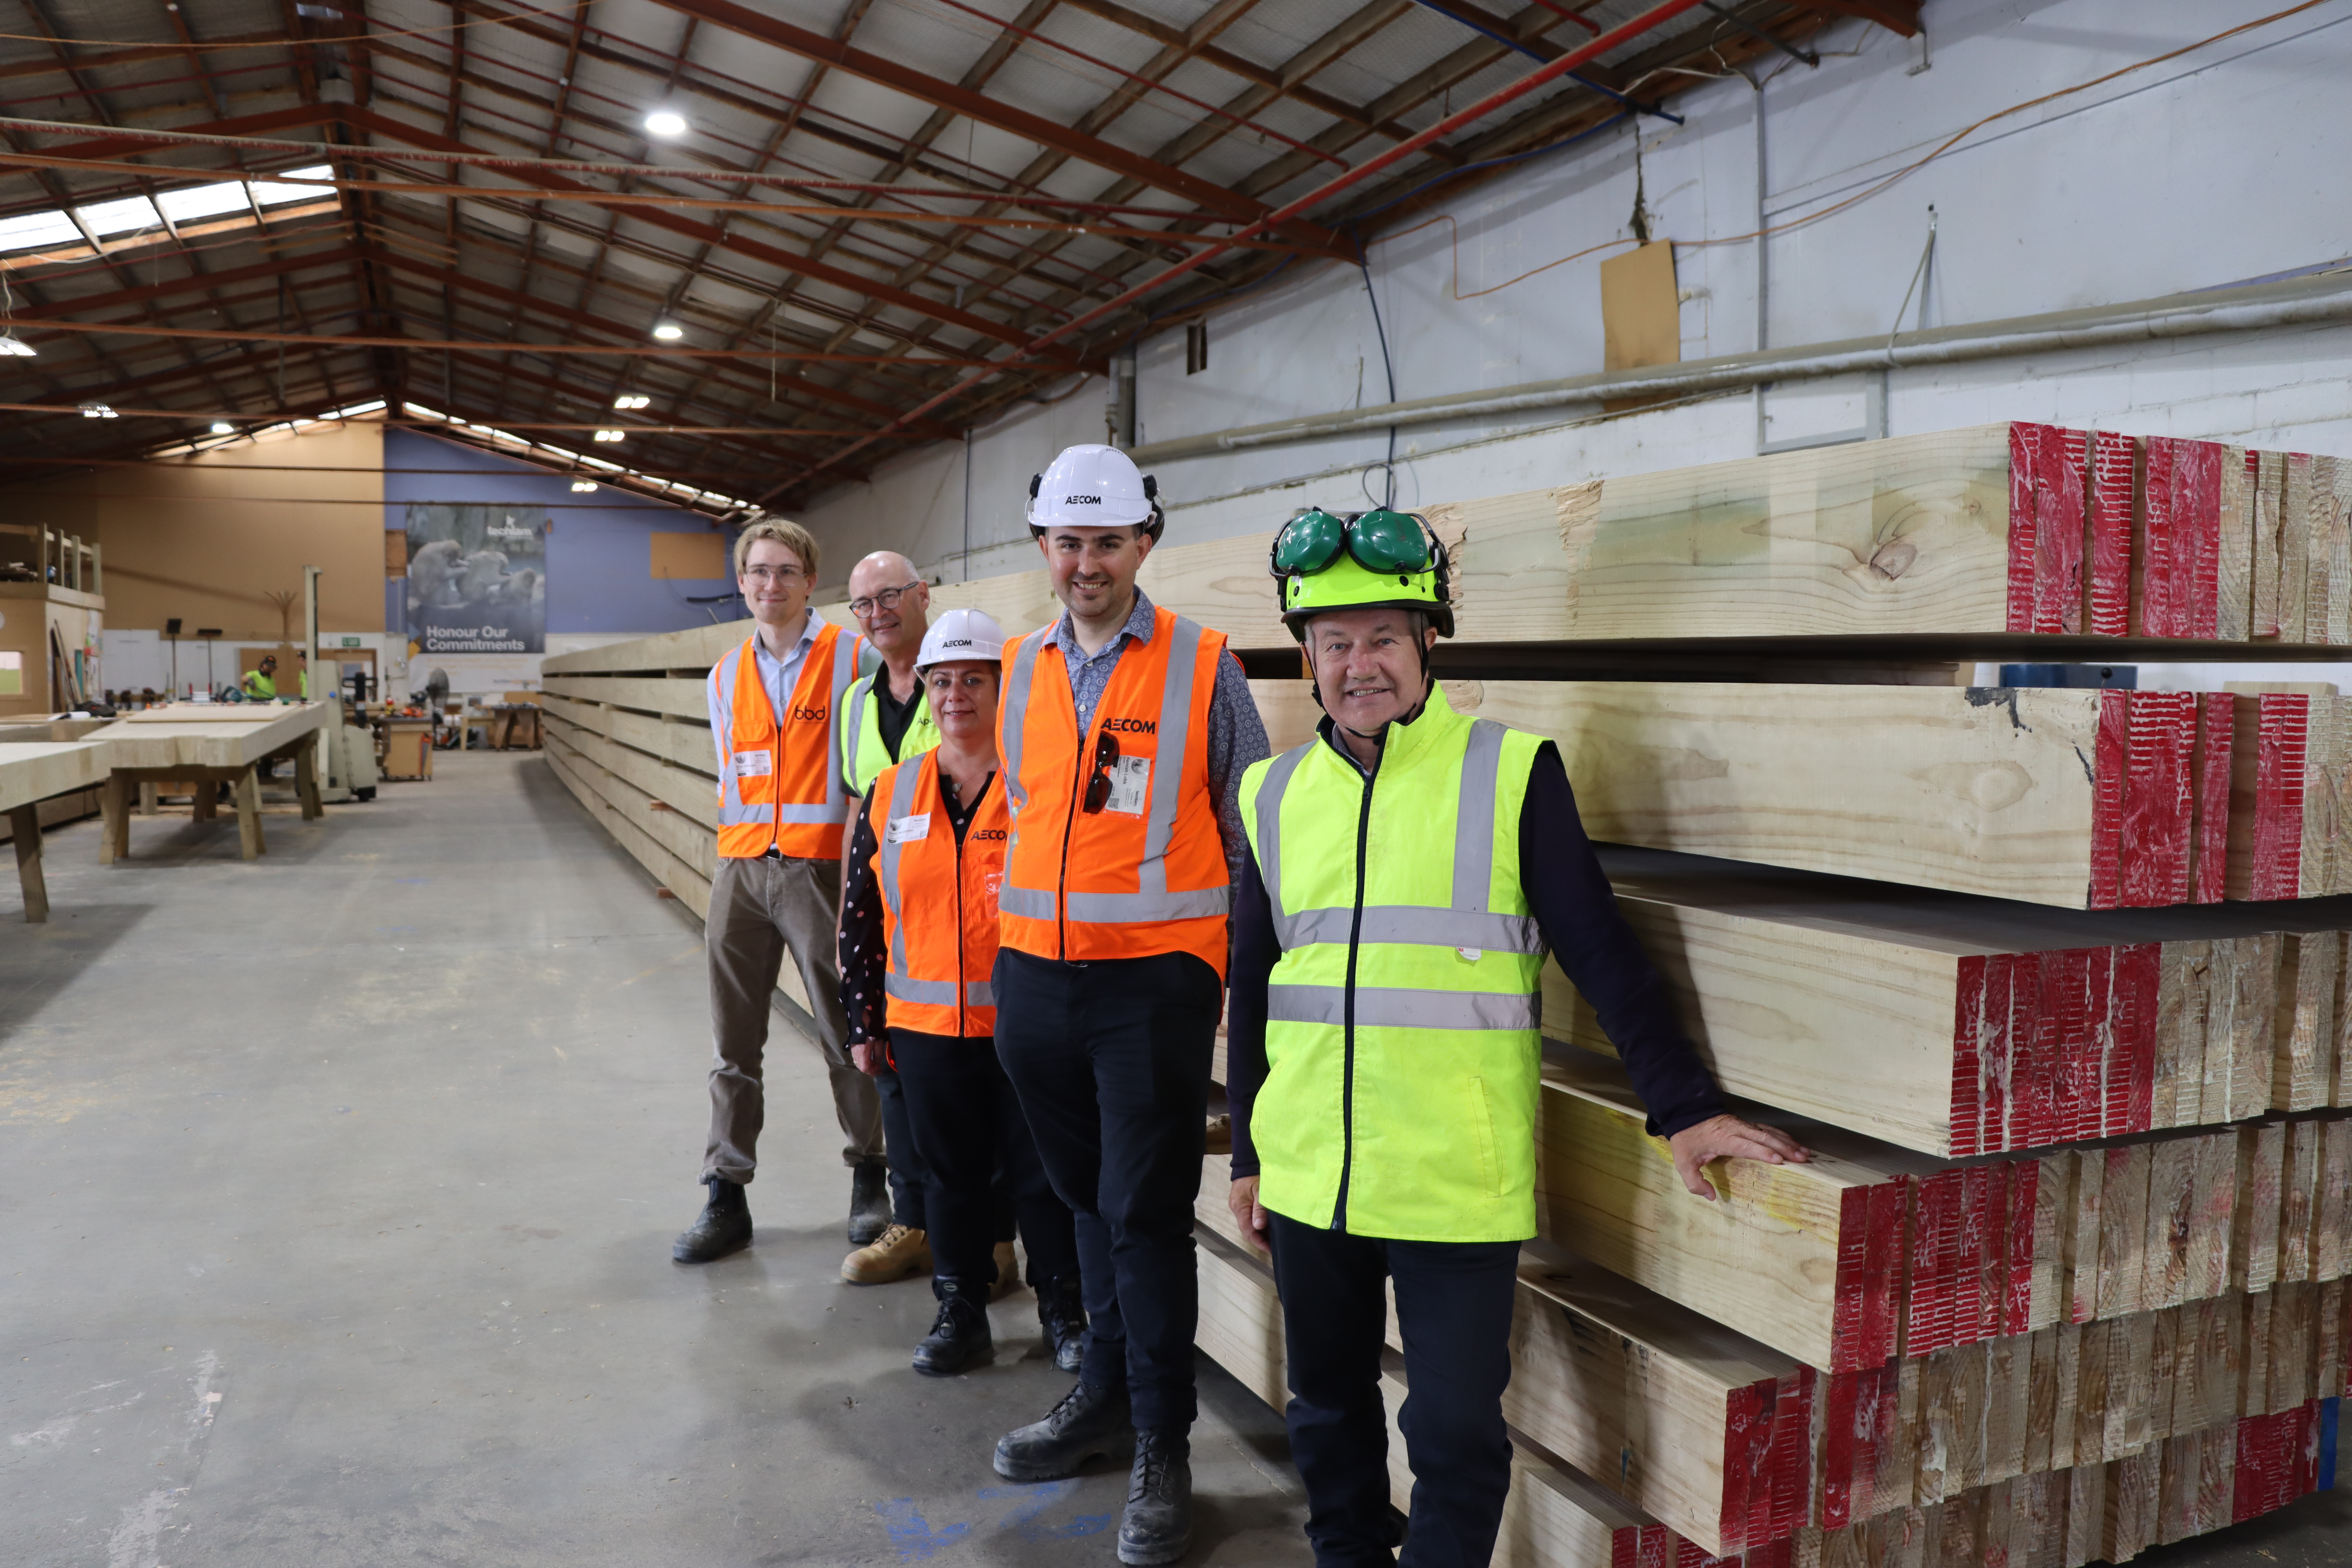 Members of the project team at Techlam. From left to right: Quantity Surveryor Bryn Anderson of BBD, Main Contractor’s Representative Mark Wilson of Apollo Projects, Engineer to Contract Sarah Bergquist and Engineer’s Rep Hamish Lobb of AECOM, and Project Manager for Hutt City Council Andrew Quinn.